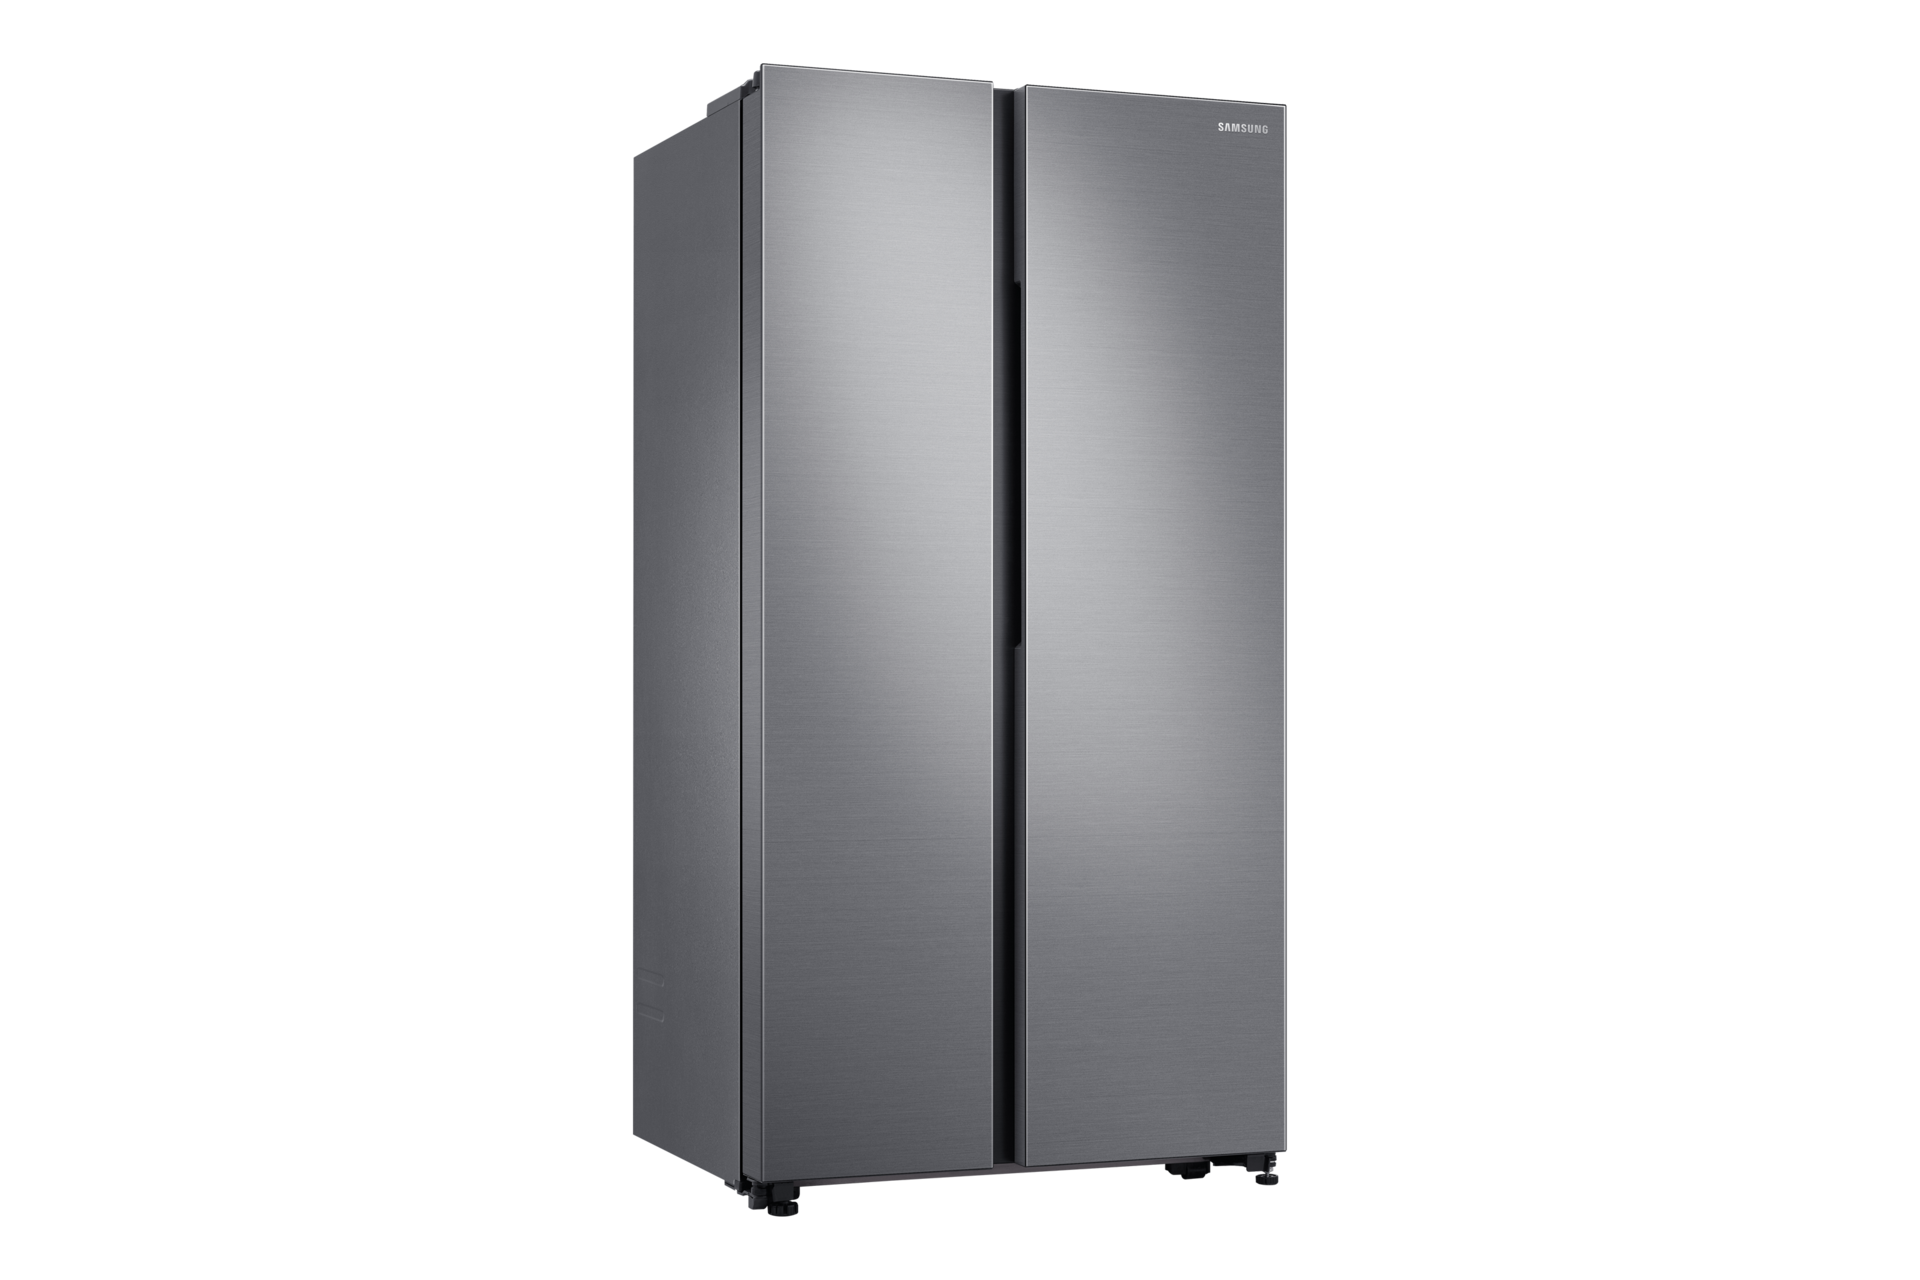 Business | 647L Side-by-side Refrigerator SpaceMax™, 2 Ticks